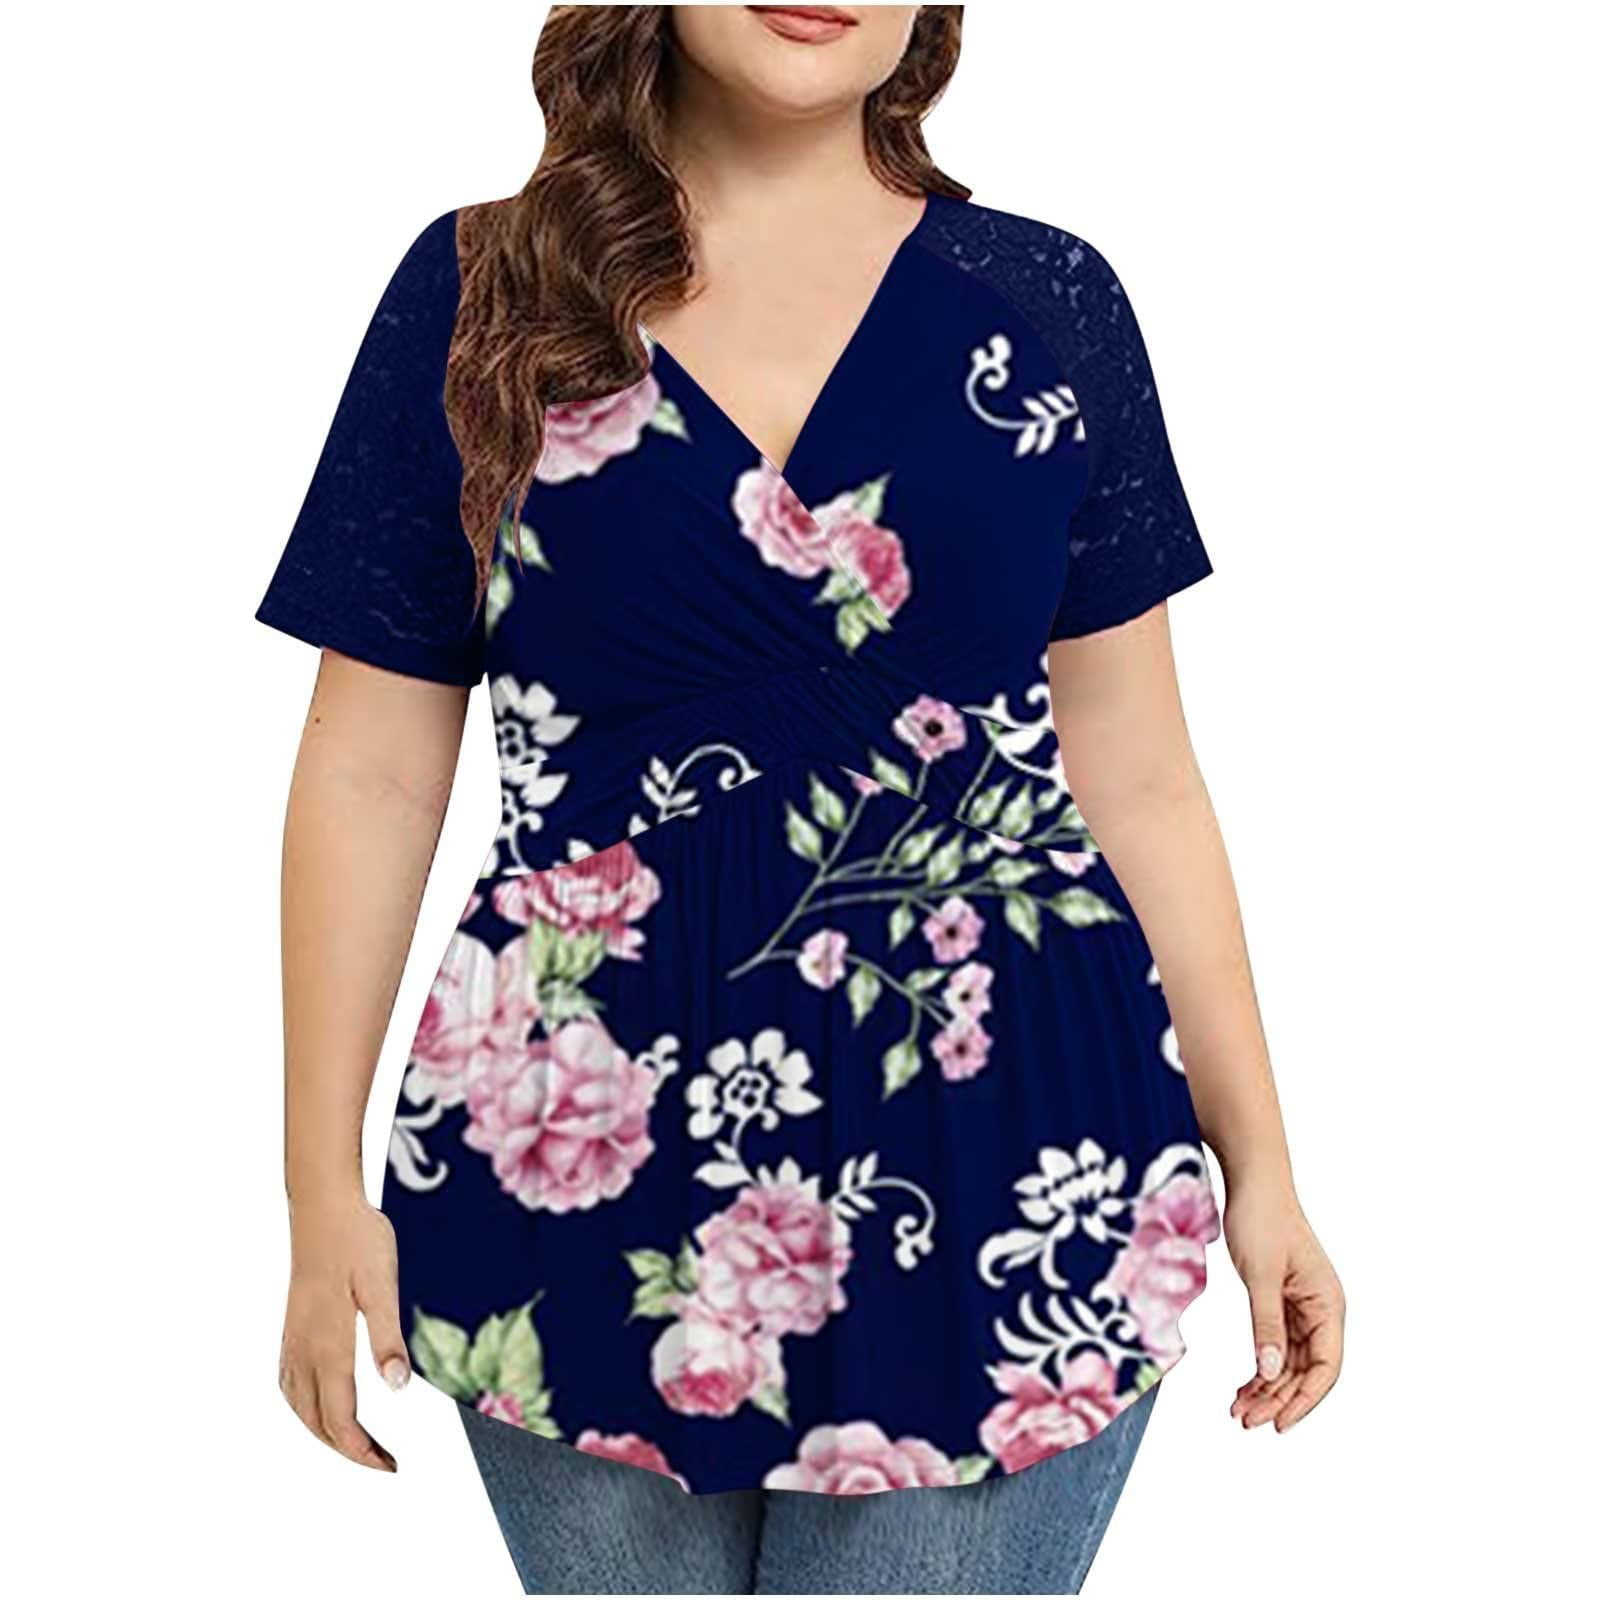 Womens Plus Size Tops Large Size Lace Stitching Printed Short Sleeve ...